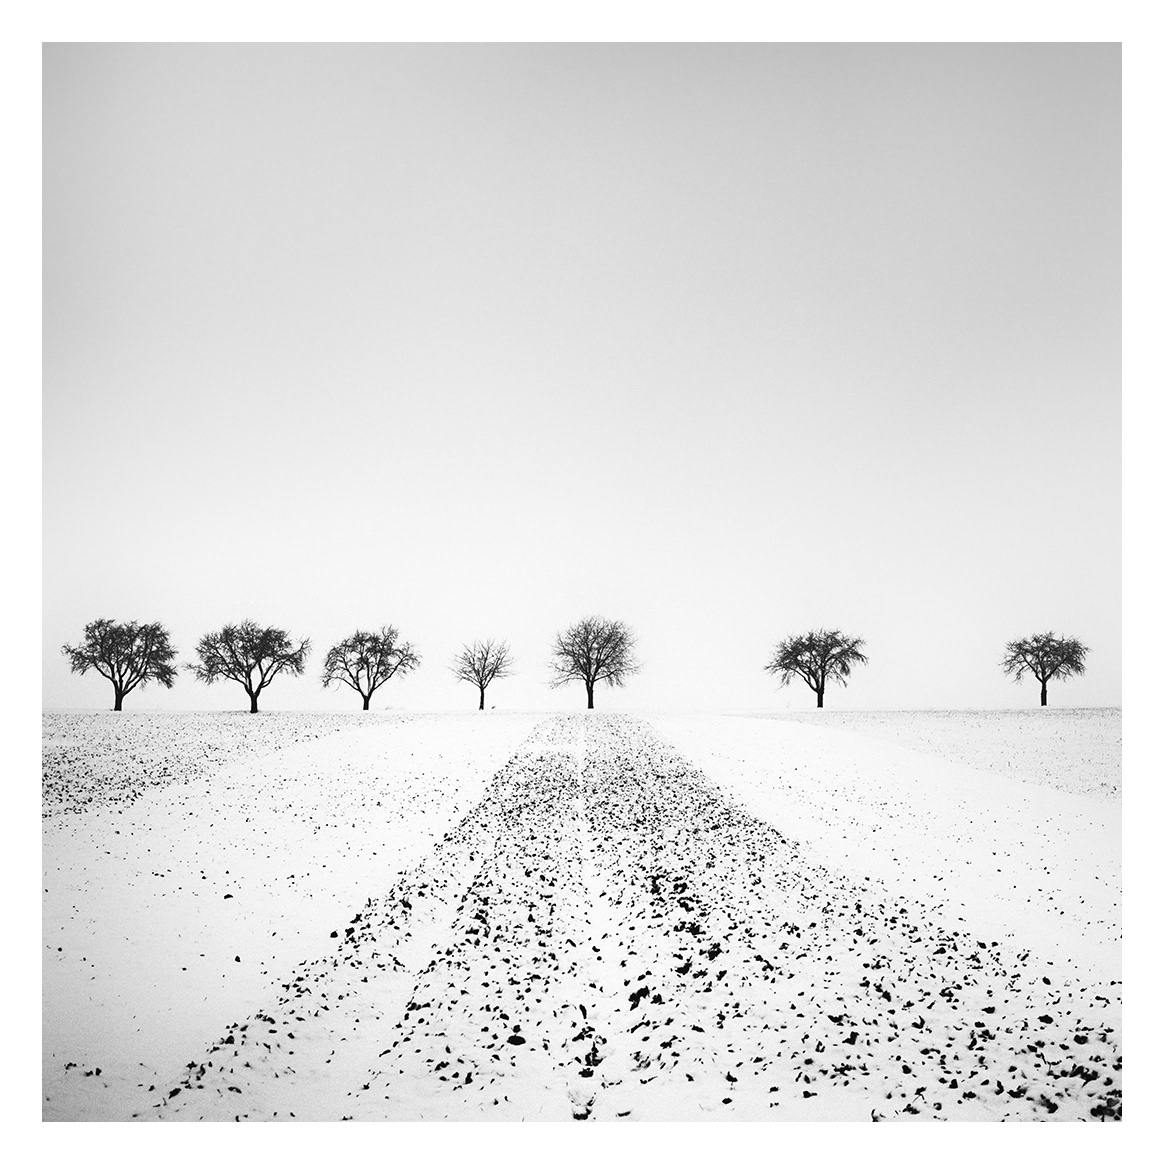 Gerald Berghammer | Trees in snowy Field, Winter, Weinviertel, Austria | Available for Sale